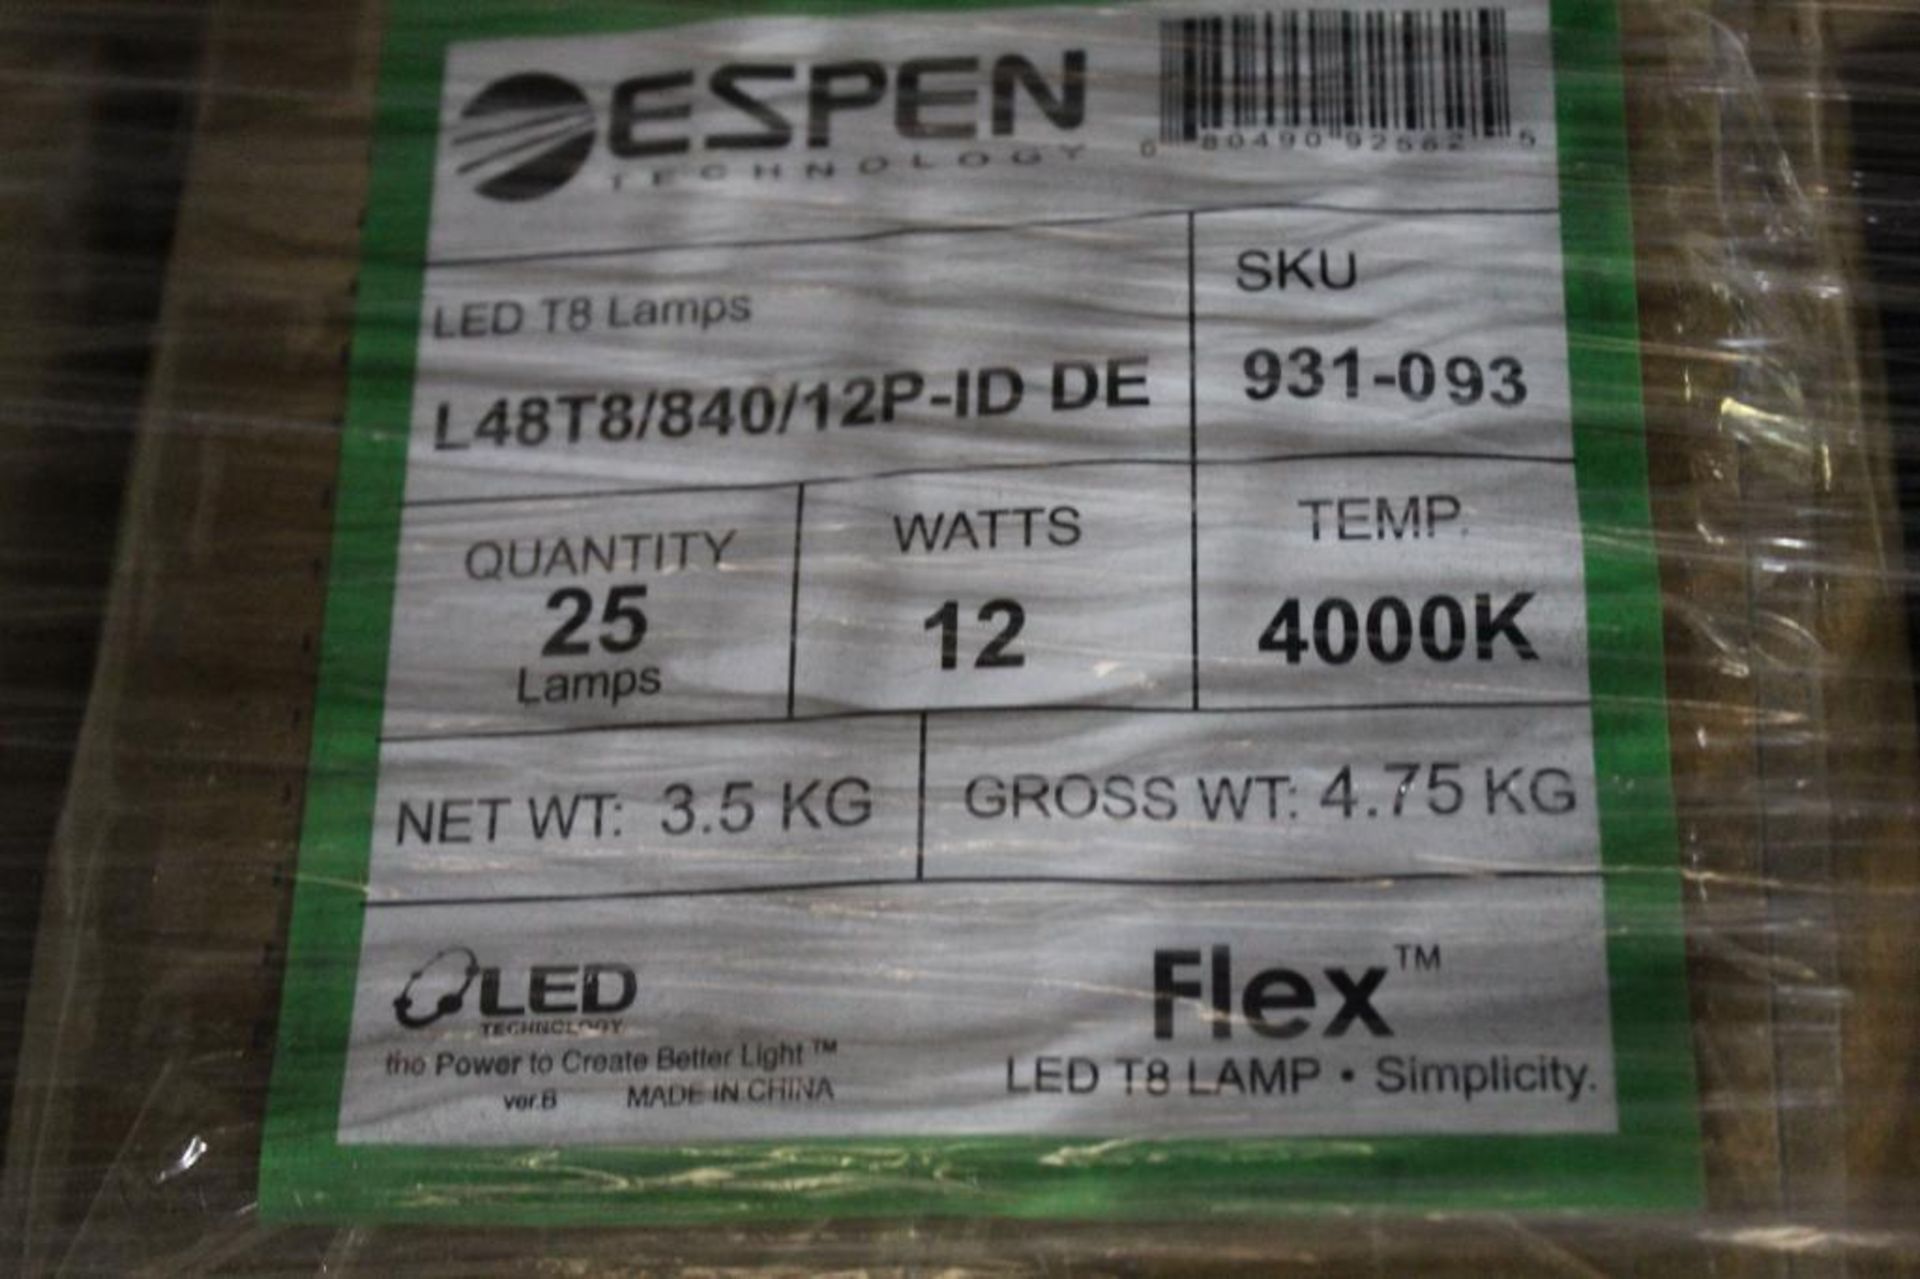 Pallet of Espen LED T8 Lamps 48" ( All Boxes Are Open, Possibly Used) - Image 7 of 7